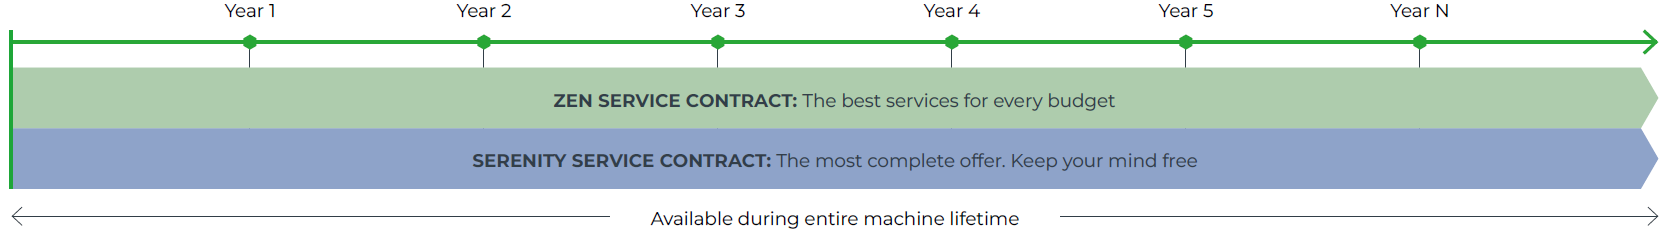 Services contracts - Timeline